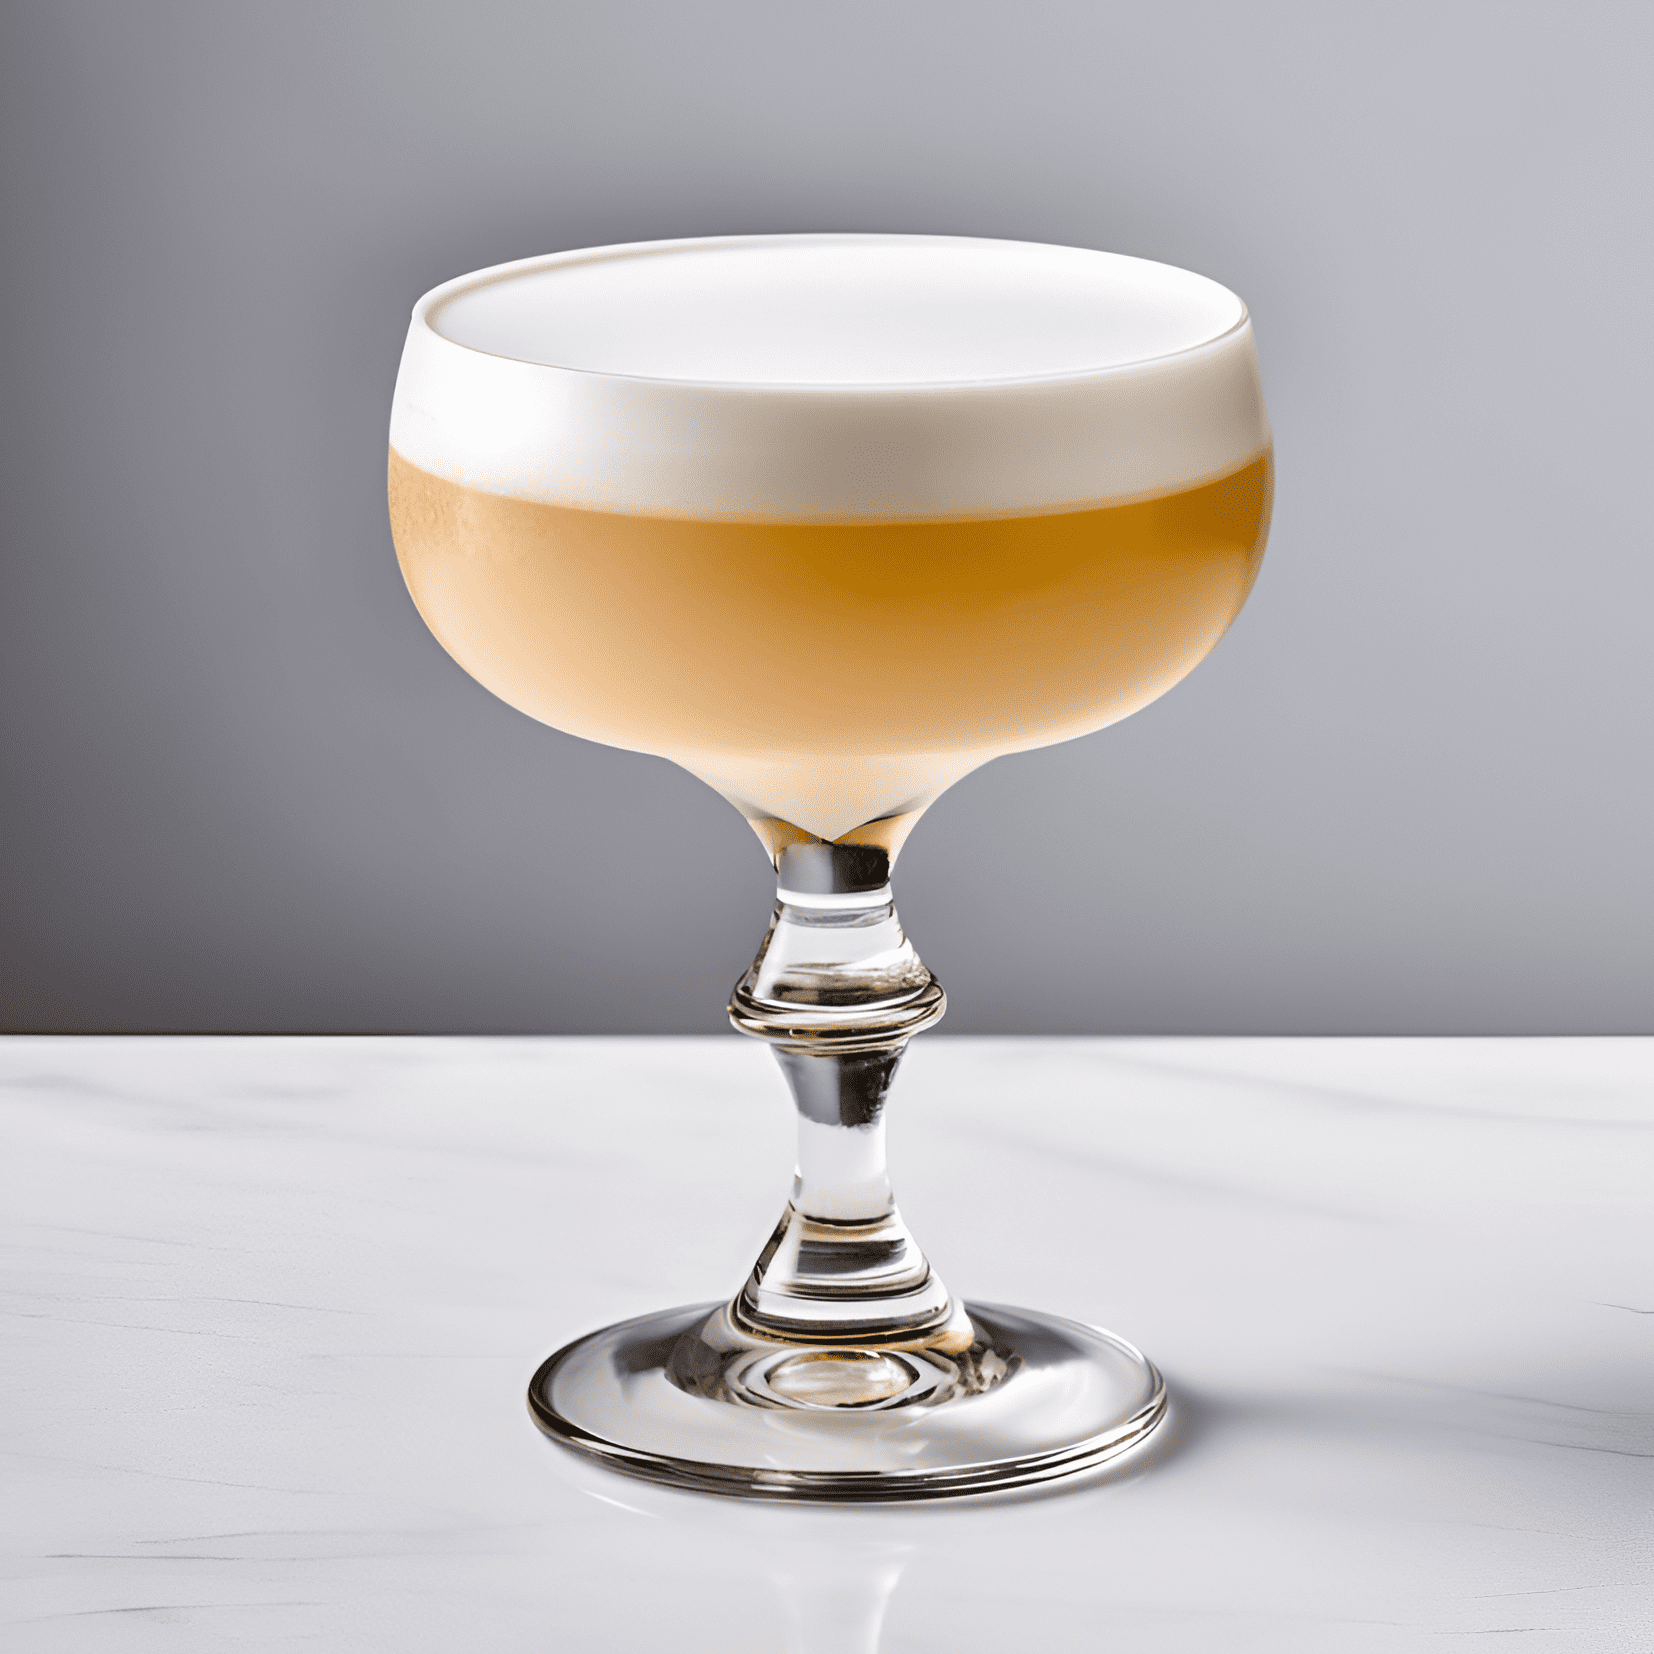 Duchess Cocktail Recipe - The Duchess cocktail is a delightful balance of sweet, sour, and bitter flavors. It has a smooth, velvety texture and a refreshing, citrusy finish.